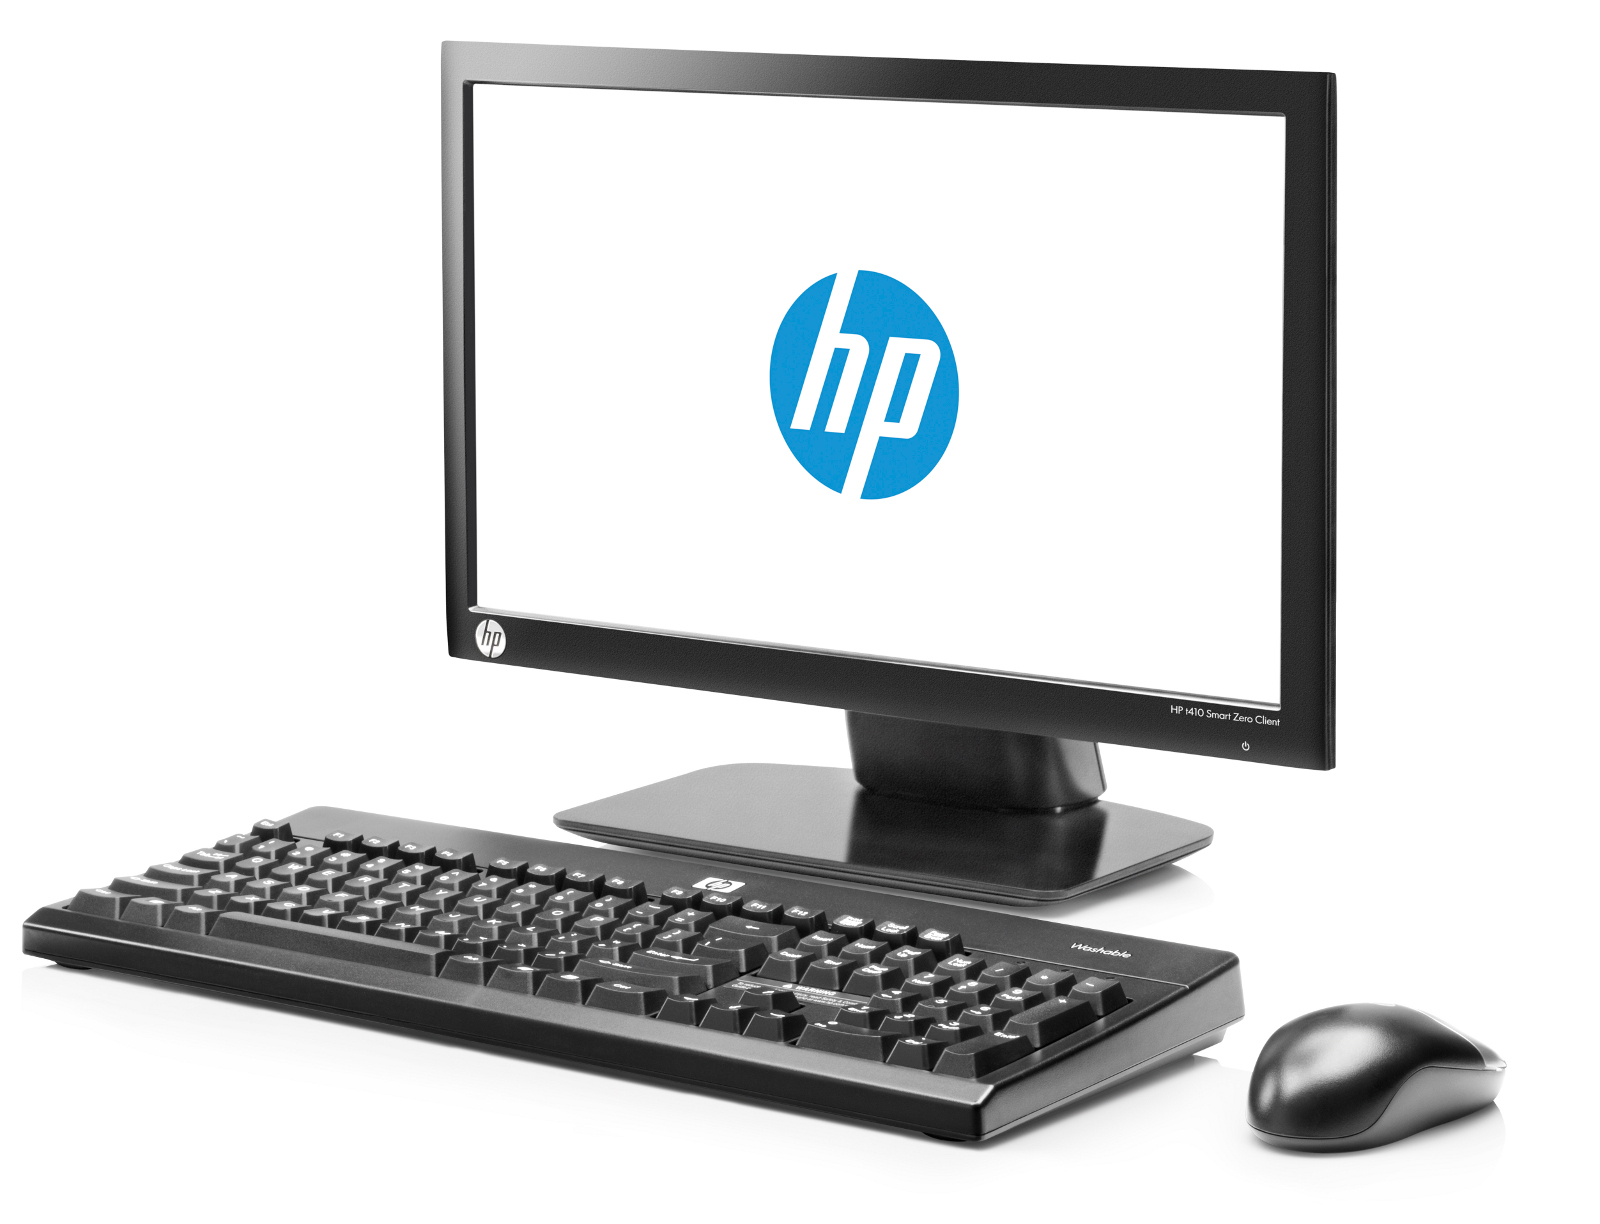 http://www.thinclient.org/thinclient-news/HP%20t410%20All-in-One%20Smart%20Zero%20Client%20setup%20view.jpg